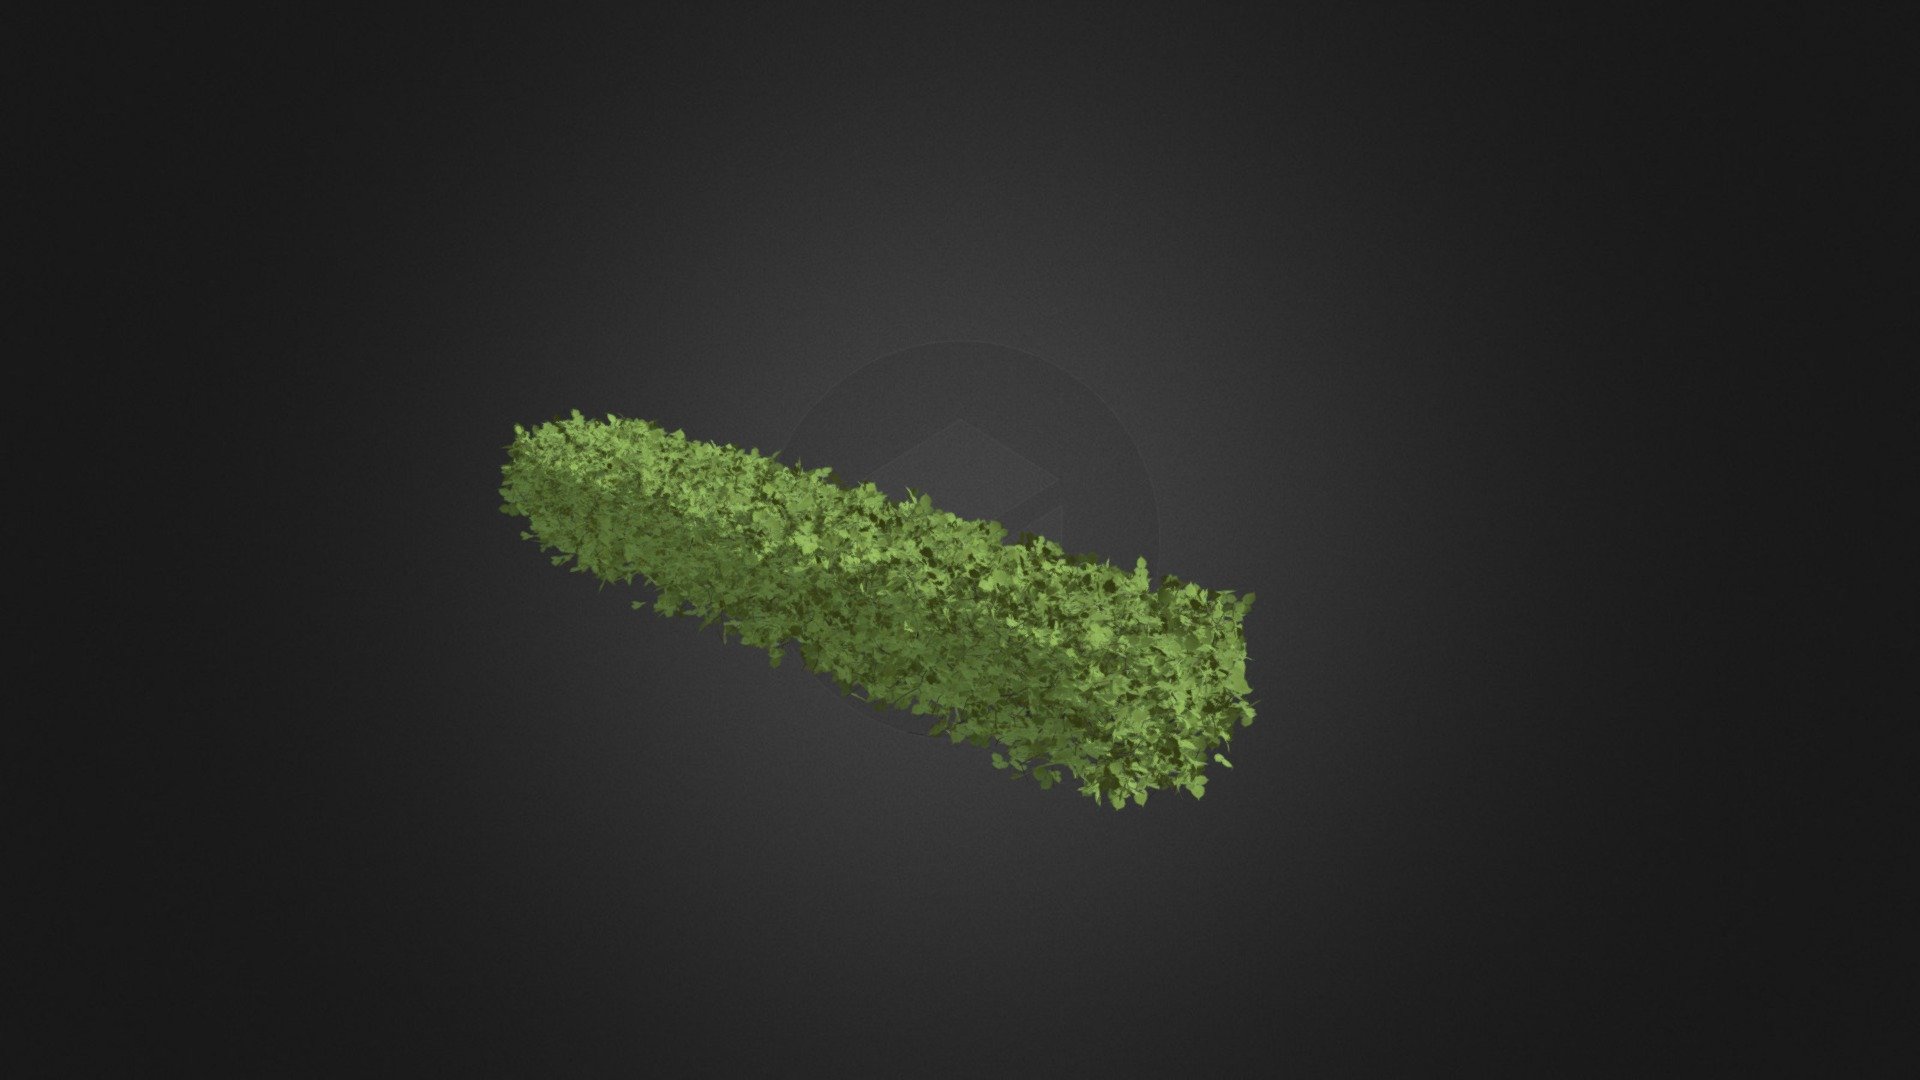 3d model of straight hedge. Height: 65cm. Compatible with 3ds max 2010 or higher and many others 3d model